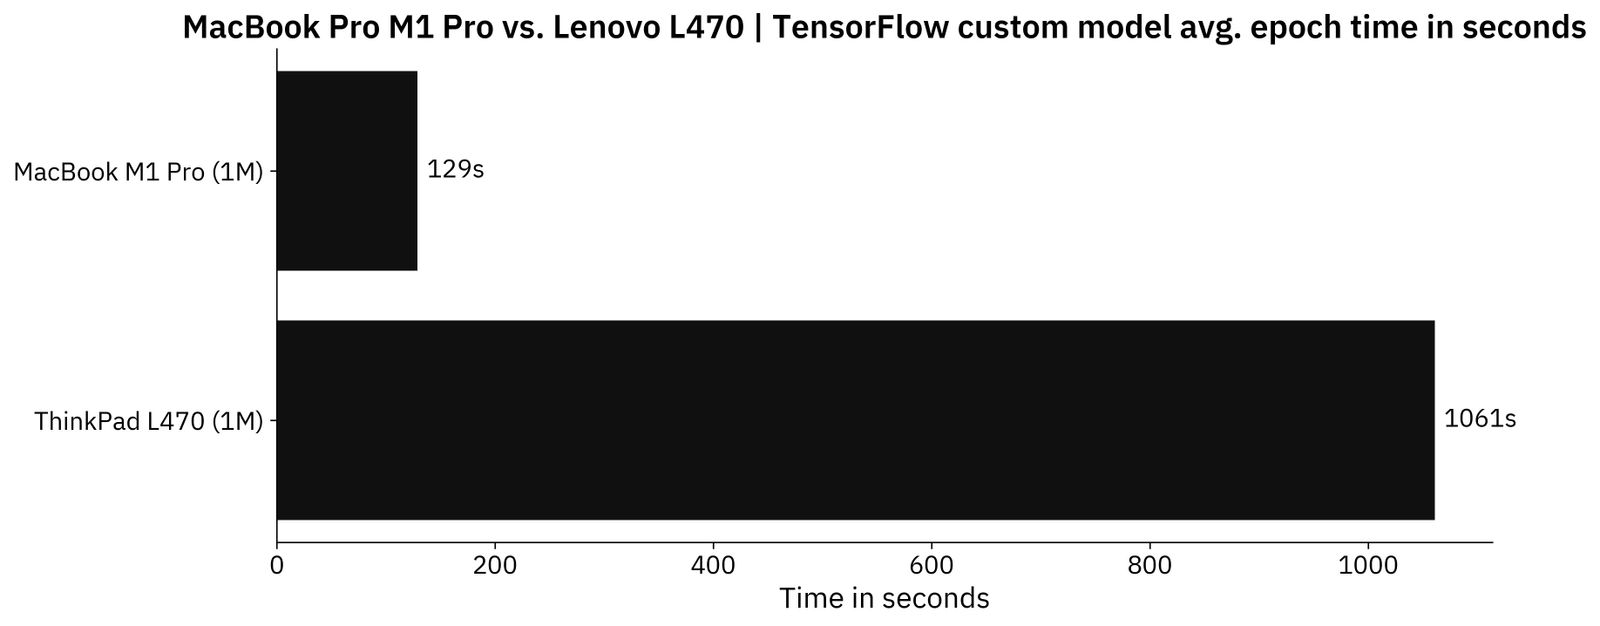 Image 8 - TensorFlow average time per epoch on a custom model (image by author)